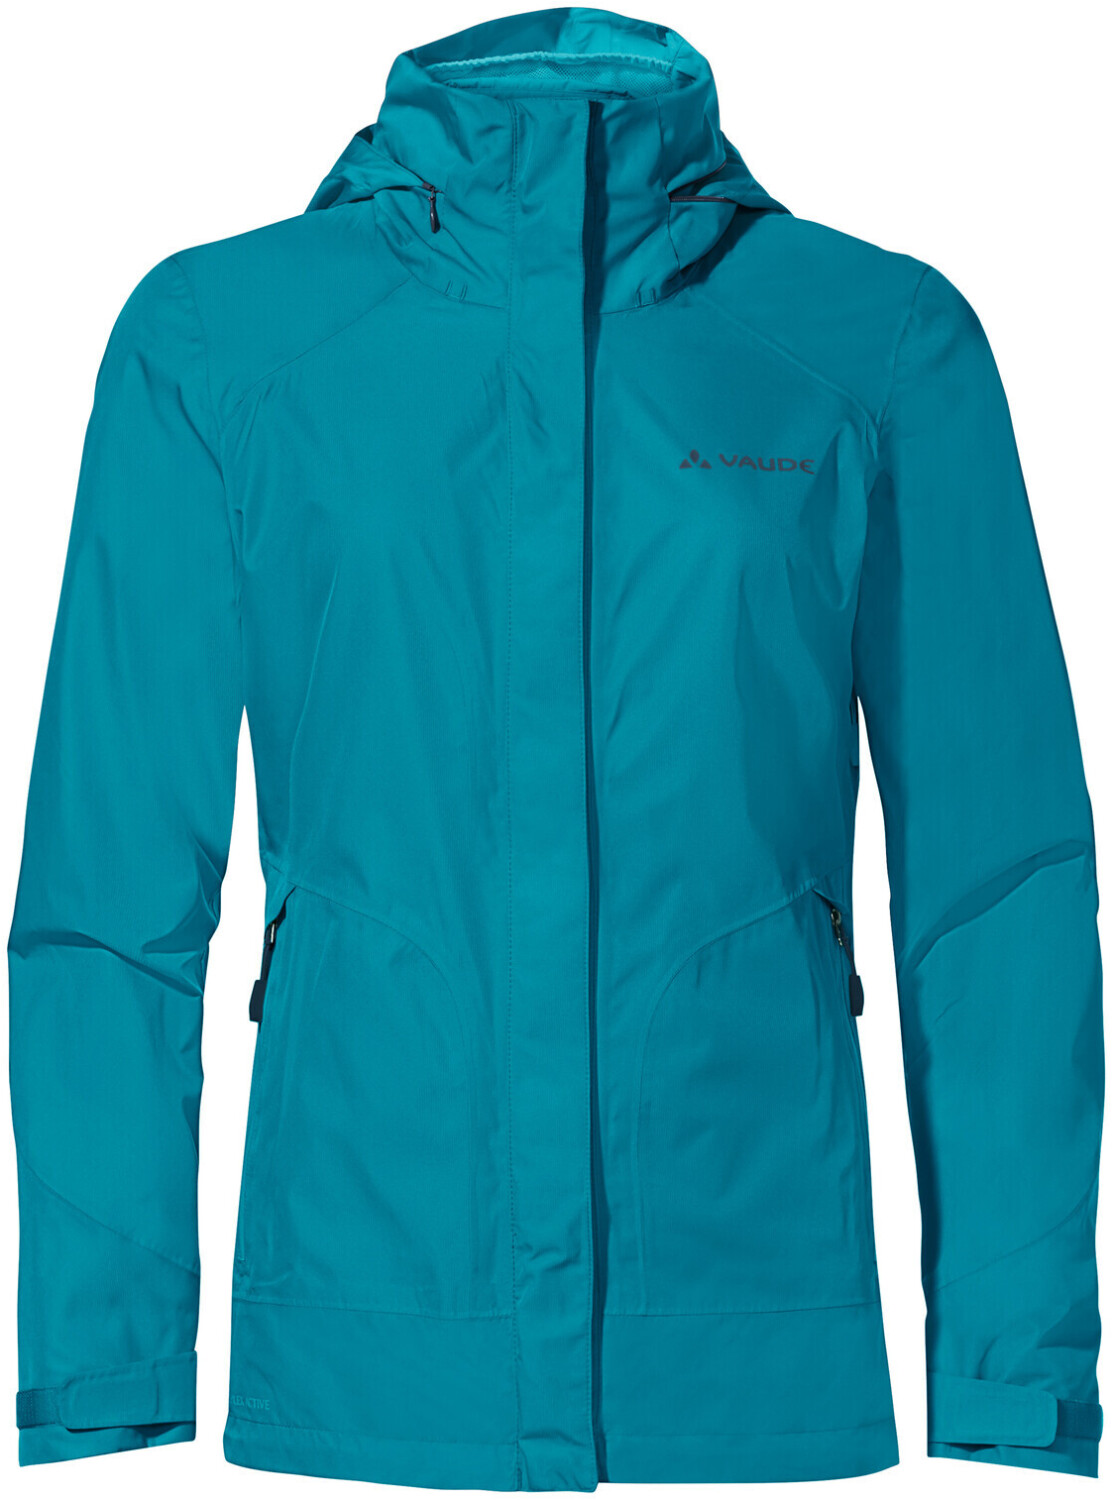 VAUDE Women's Elope Jacket arctic blue - In The Know Cycling